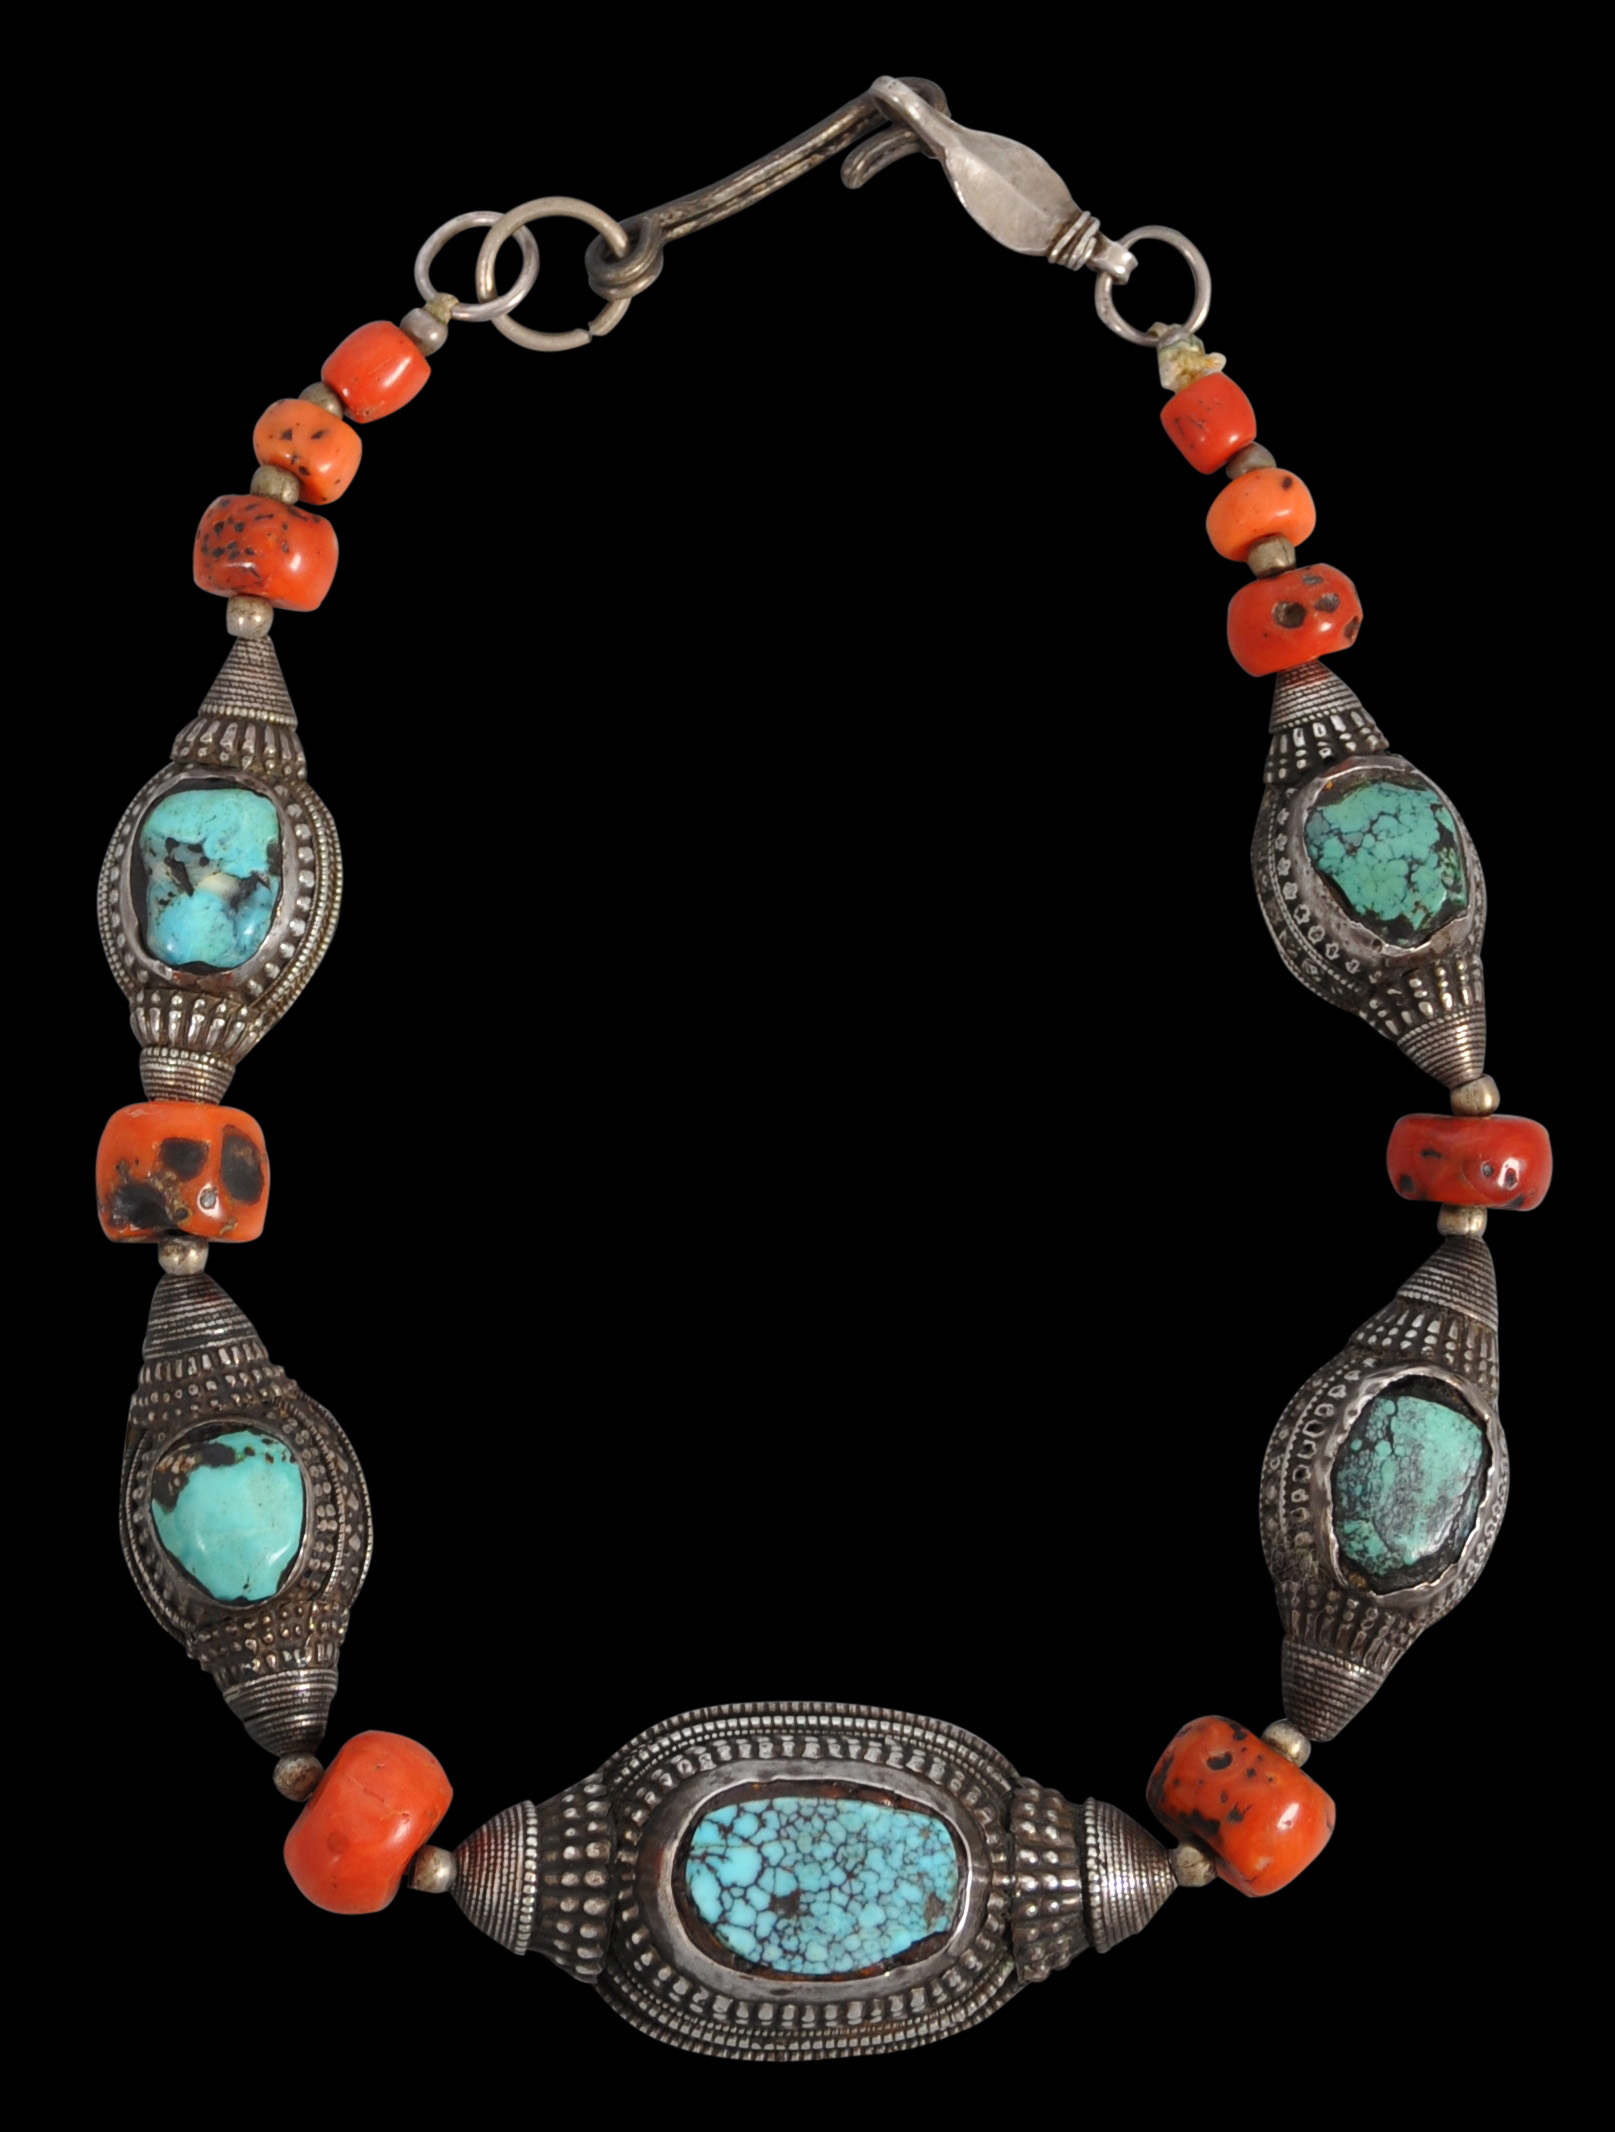 Buy Tirbal Ethnic Tibetan Resin and Brass Metal Beads Fashion Women Casual  Pendent Necklace (Red_Turquoise) at Amazon.in